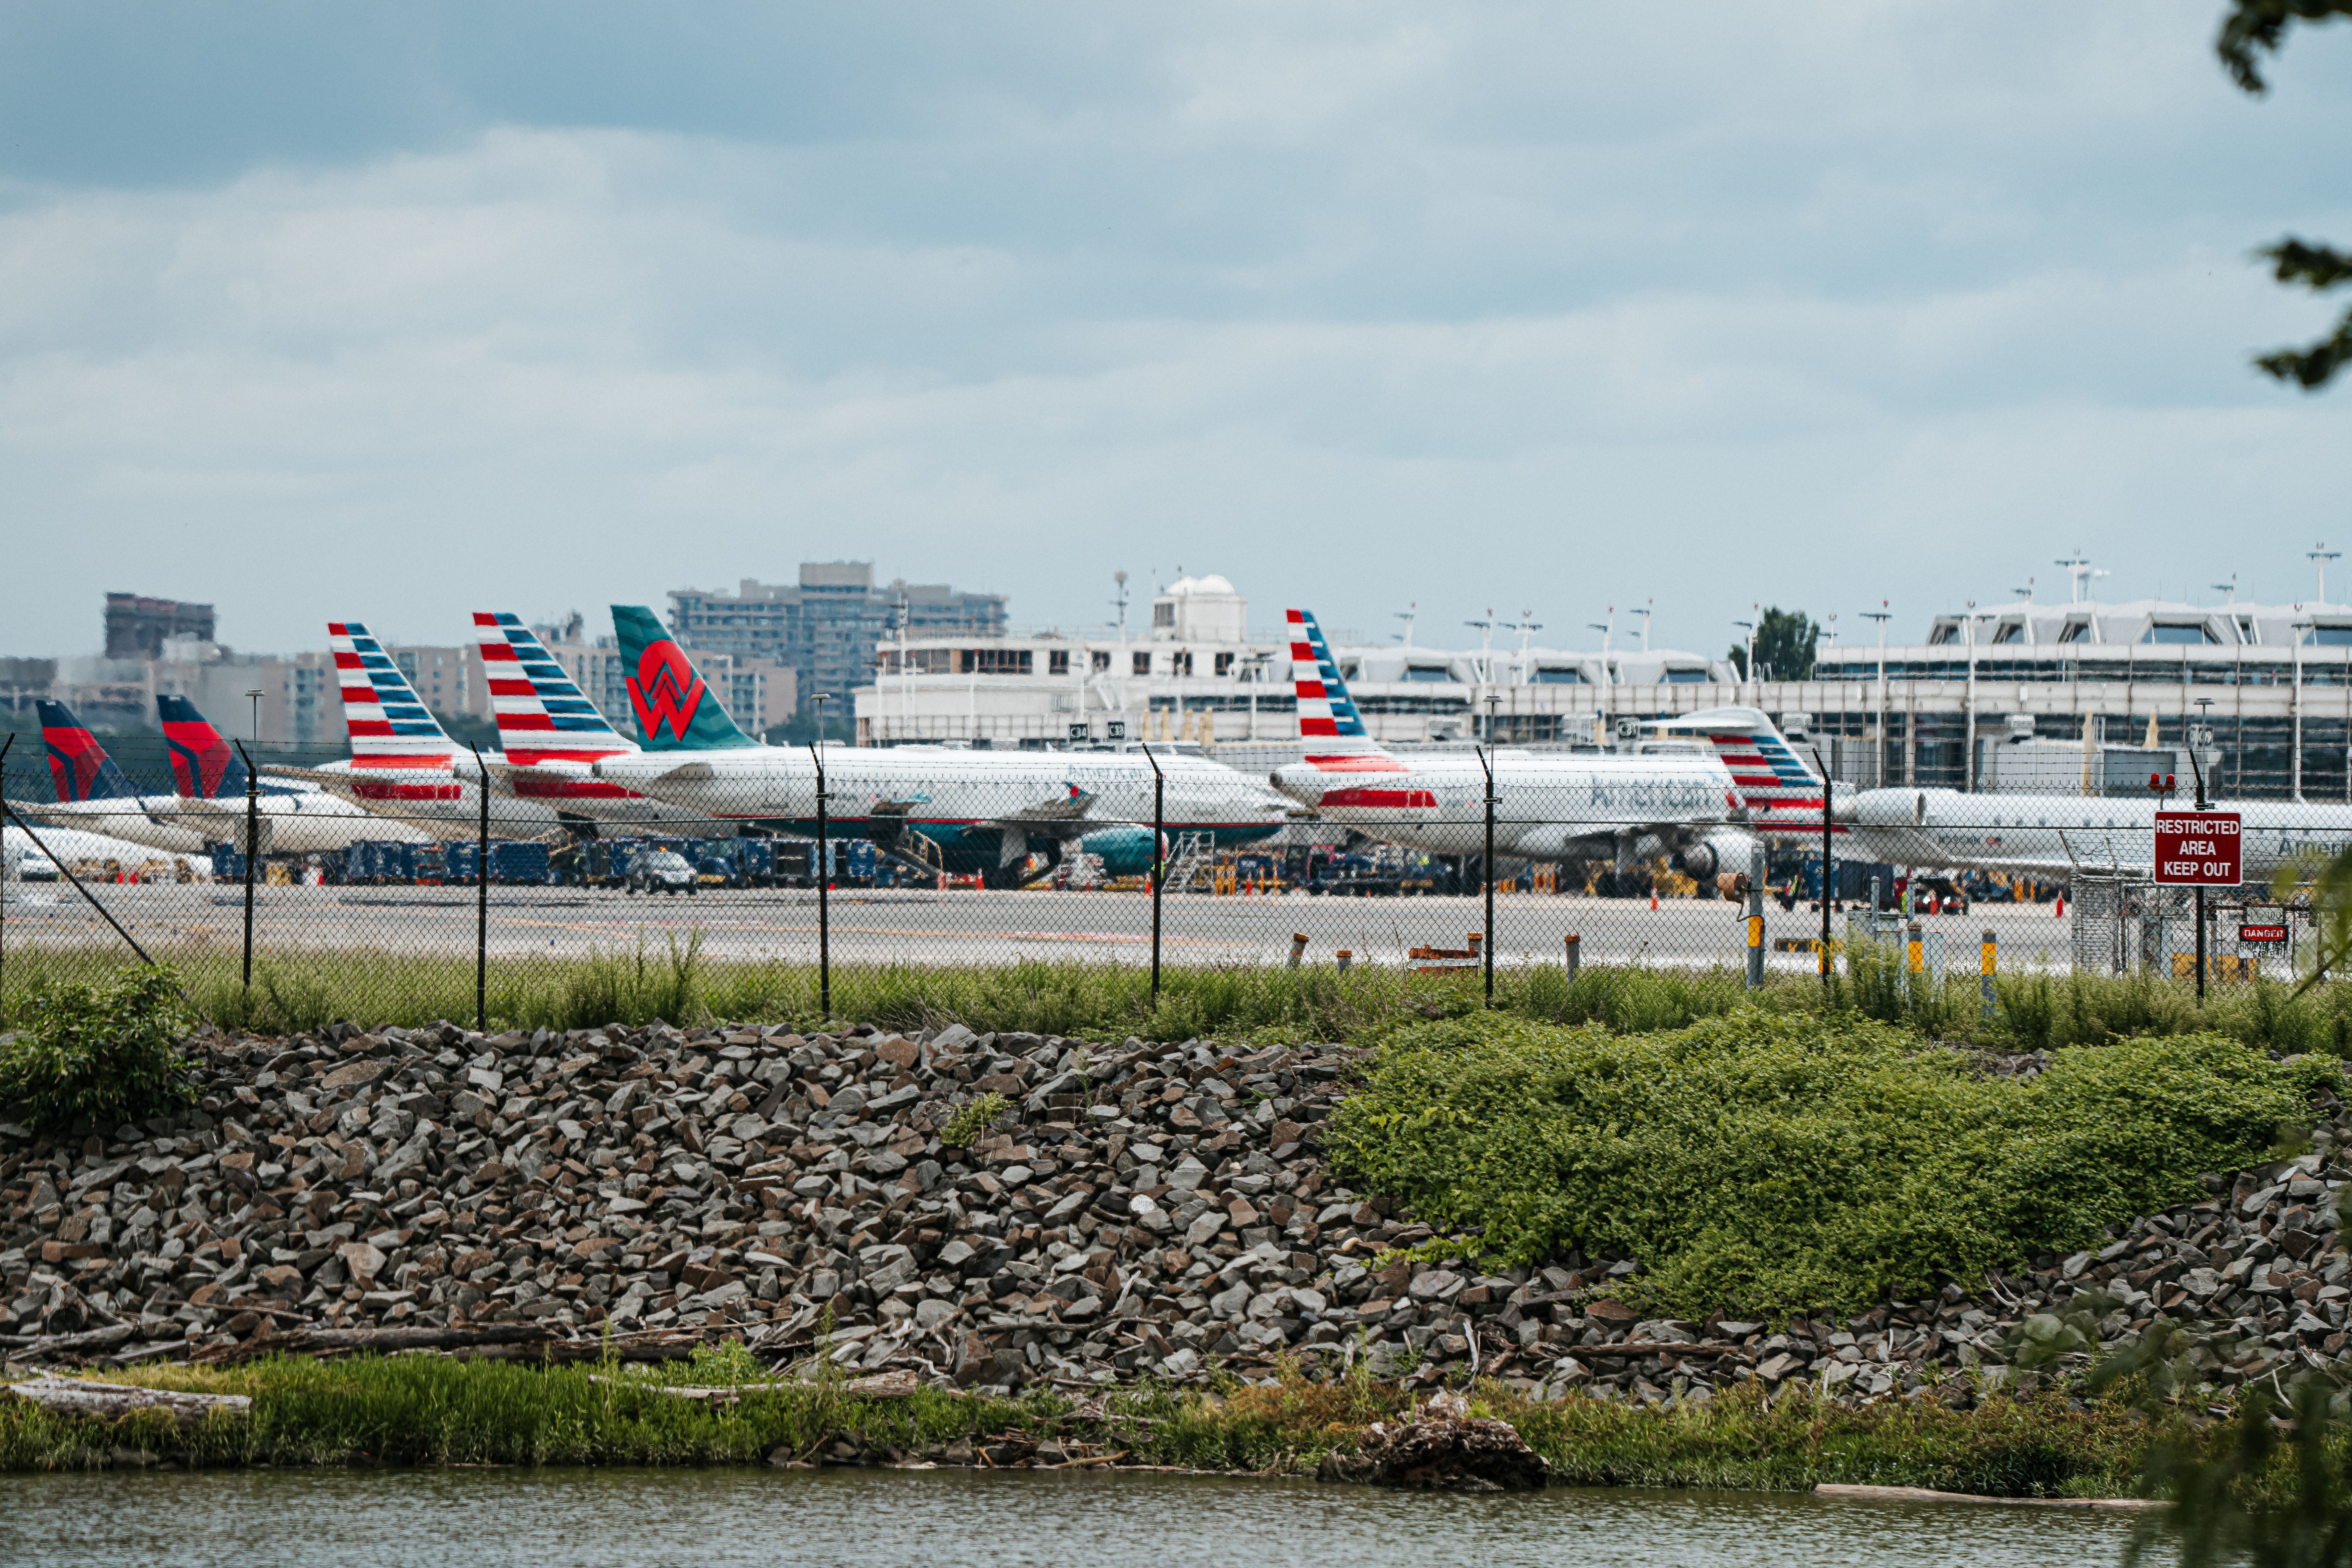 DCA ramp view from Gravelly Point - Lukas Souza